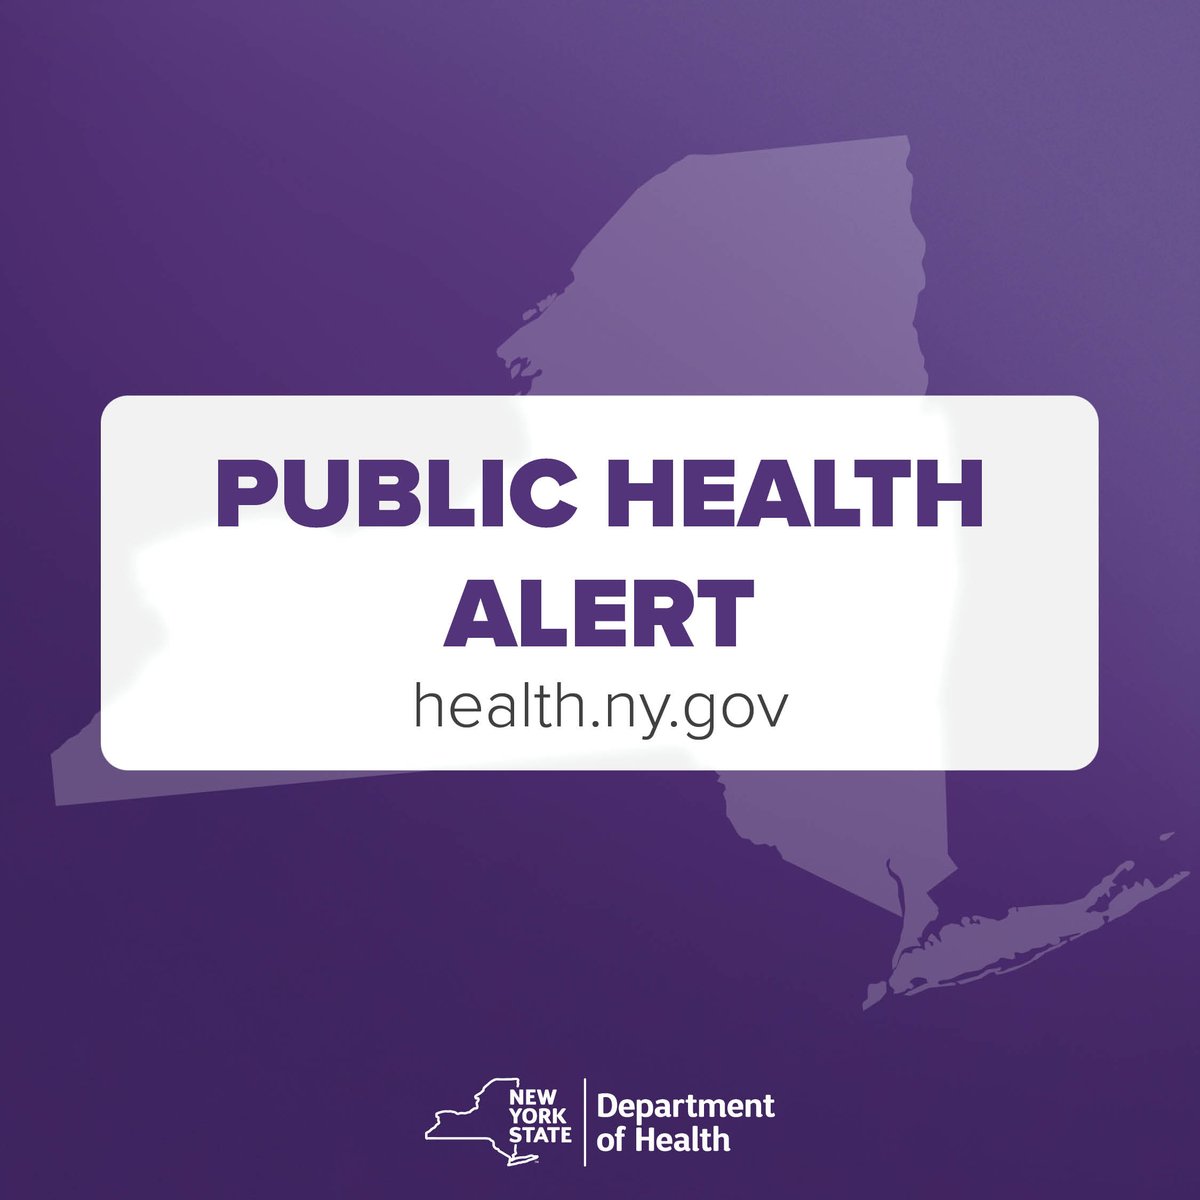 The Department is closely monitoring a case of measles in the State outside of NYC. The most important thing people can do to protect themselves is to verify they’ve been properly immunized against measles and immediately get a shot if they are not. Info: health.ny.gov/press/releases…